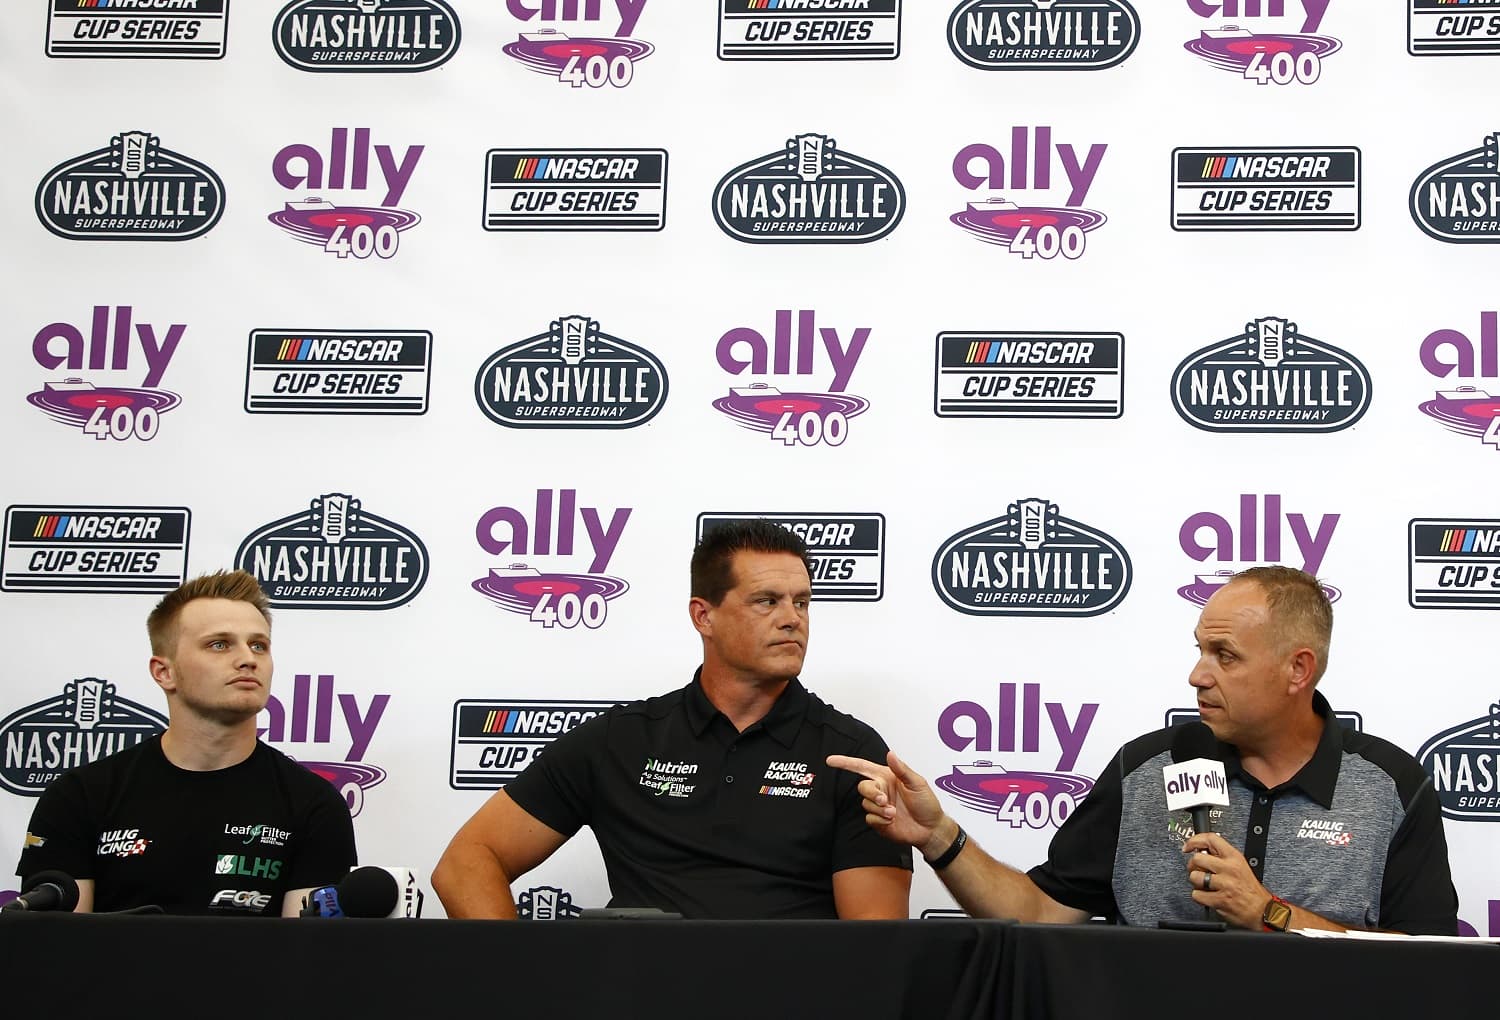 Justin Haley, Matt Kaulig, and Chris Rice announce that Kaulig Racing will race full time in the NASCAR Cup Series season in 2022, during a press conference prior to practice for the NASCAR Xfinity Series Tennessee Lottery 250 at Nashville Superspeedway on June 18, 2021.